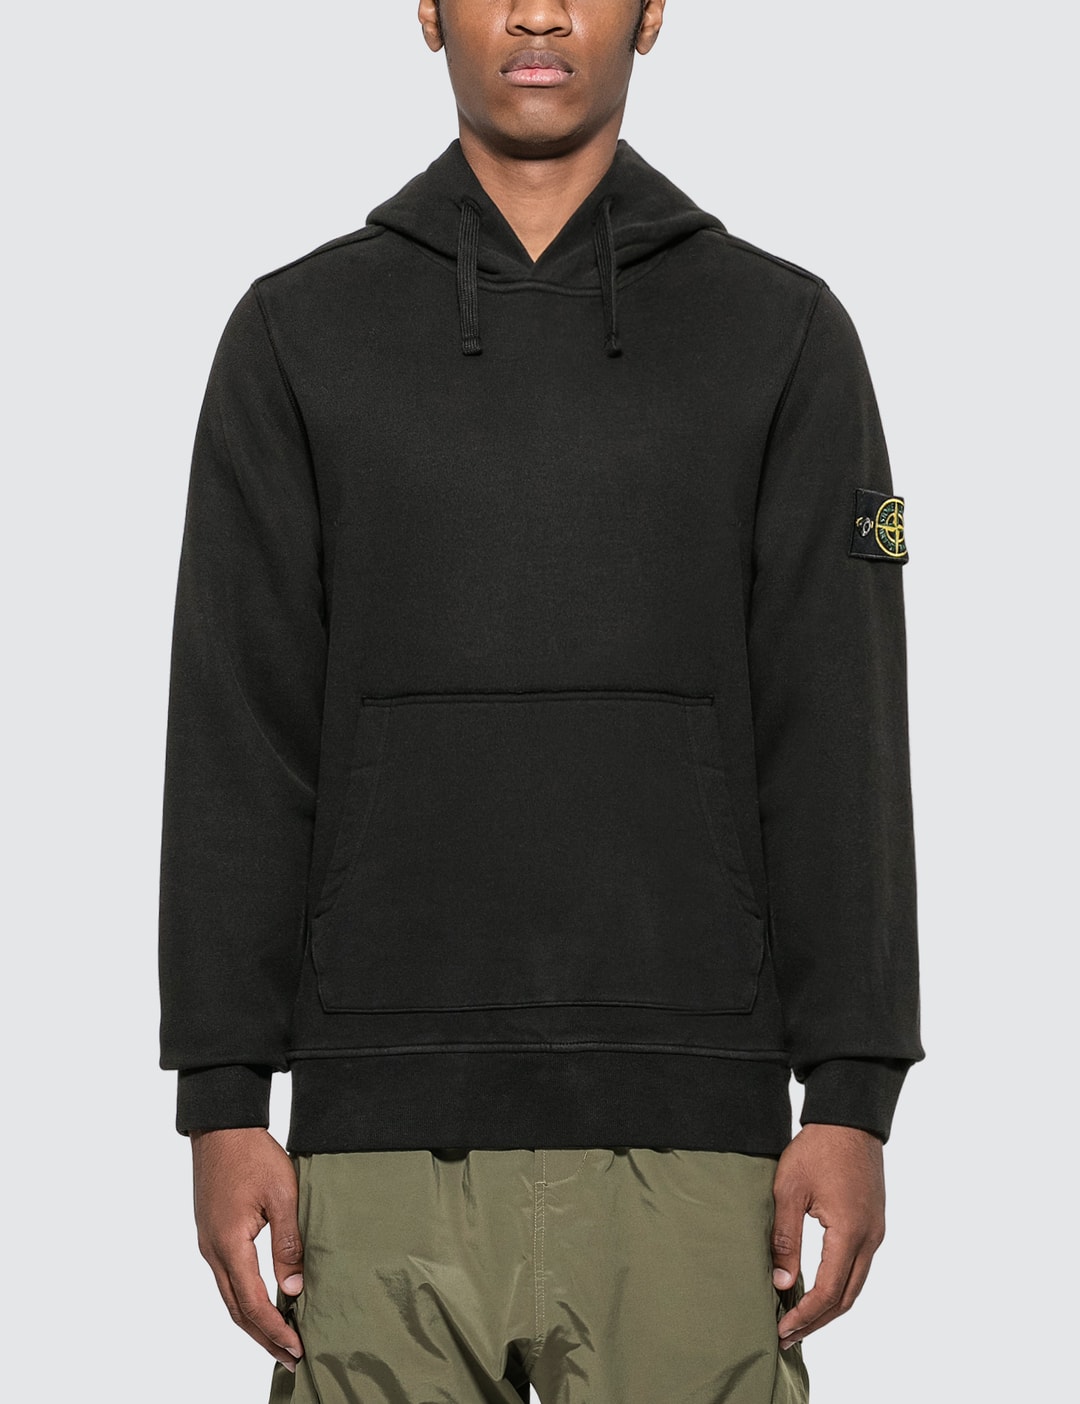 Stone Island - Compass Logo Patch Hoodie | HBX - Globally Curated ...